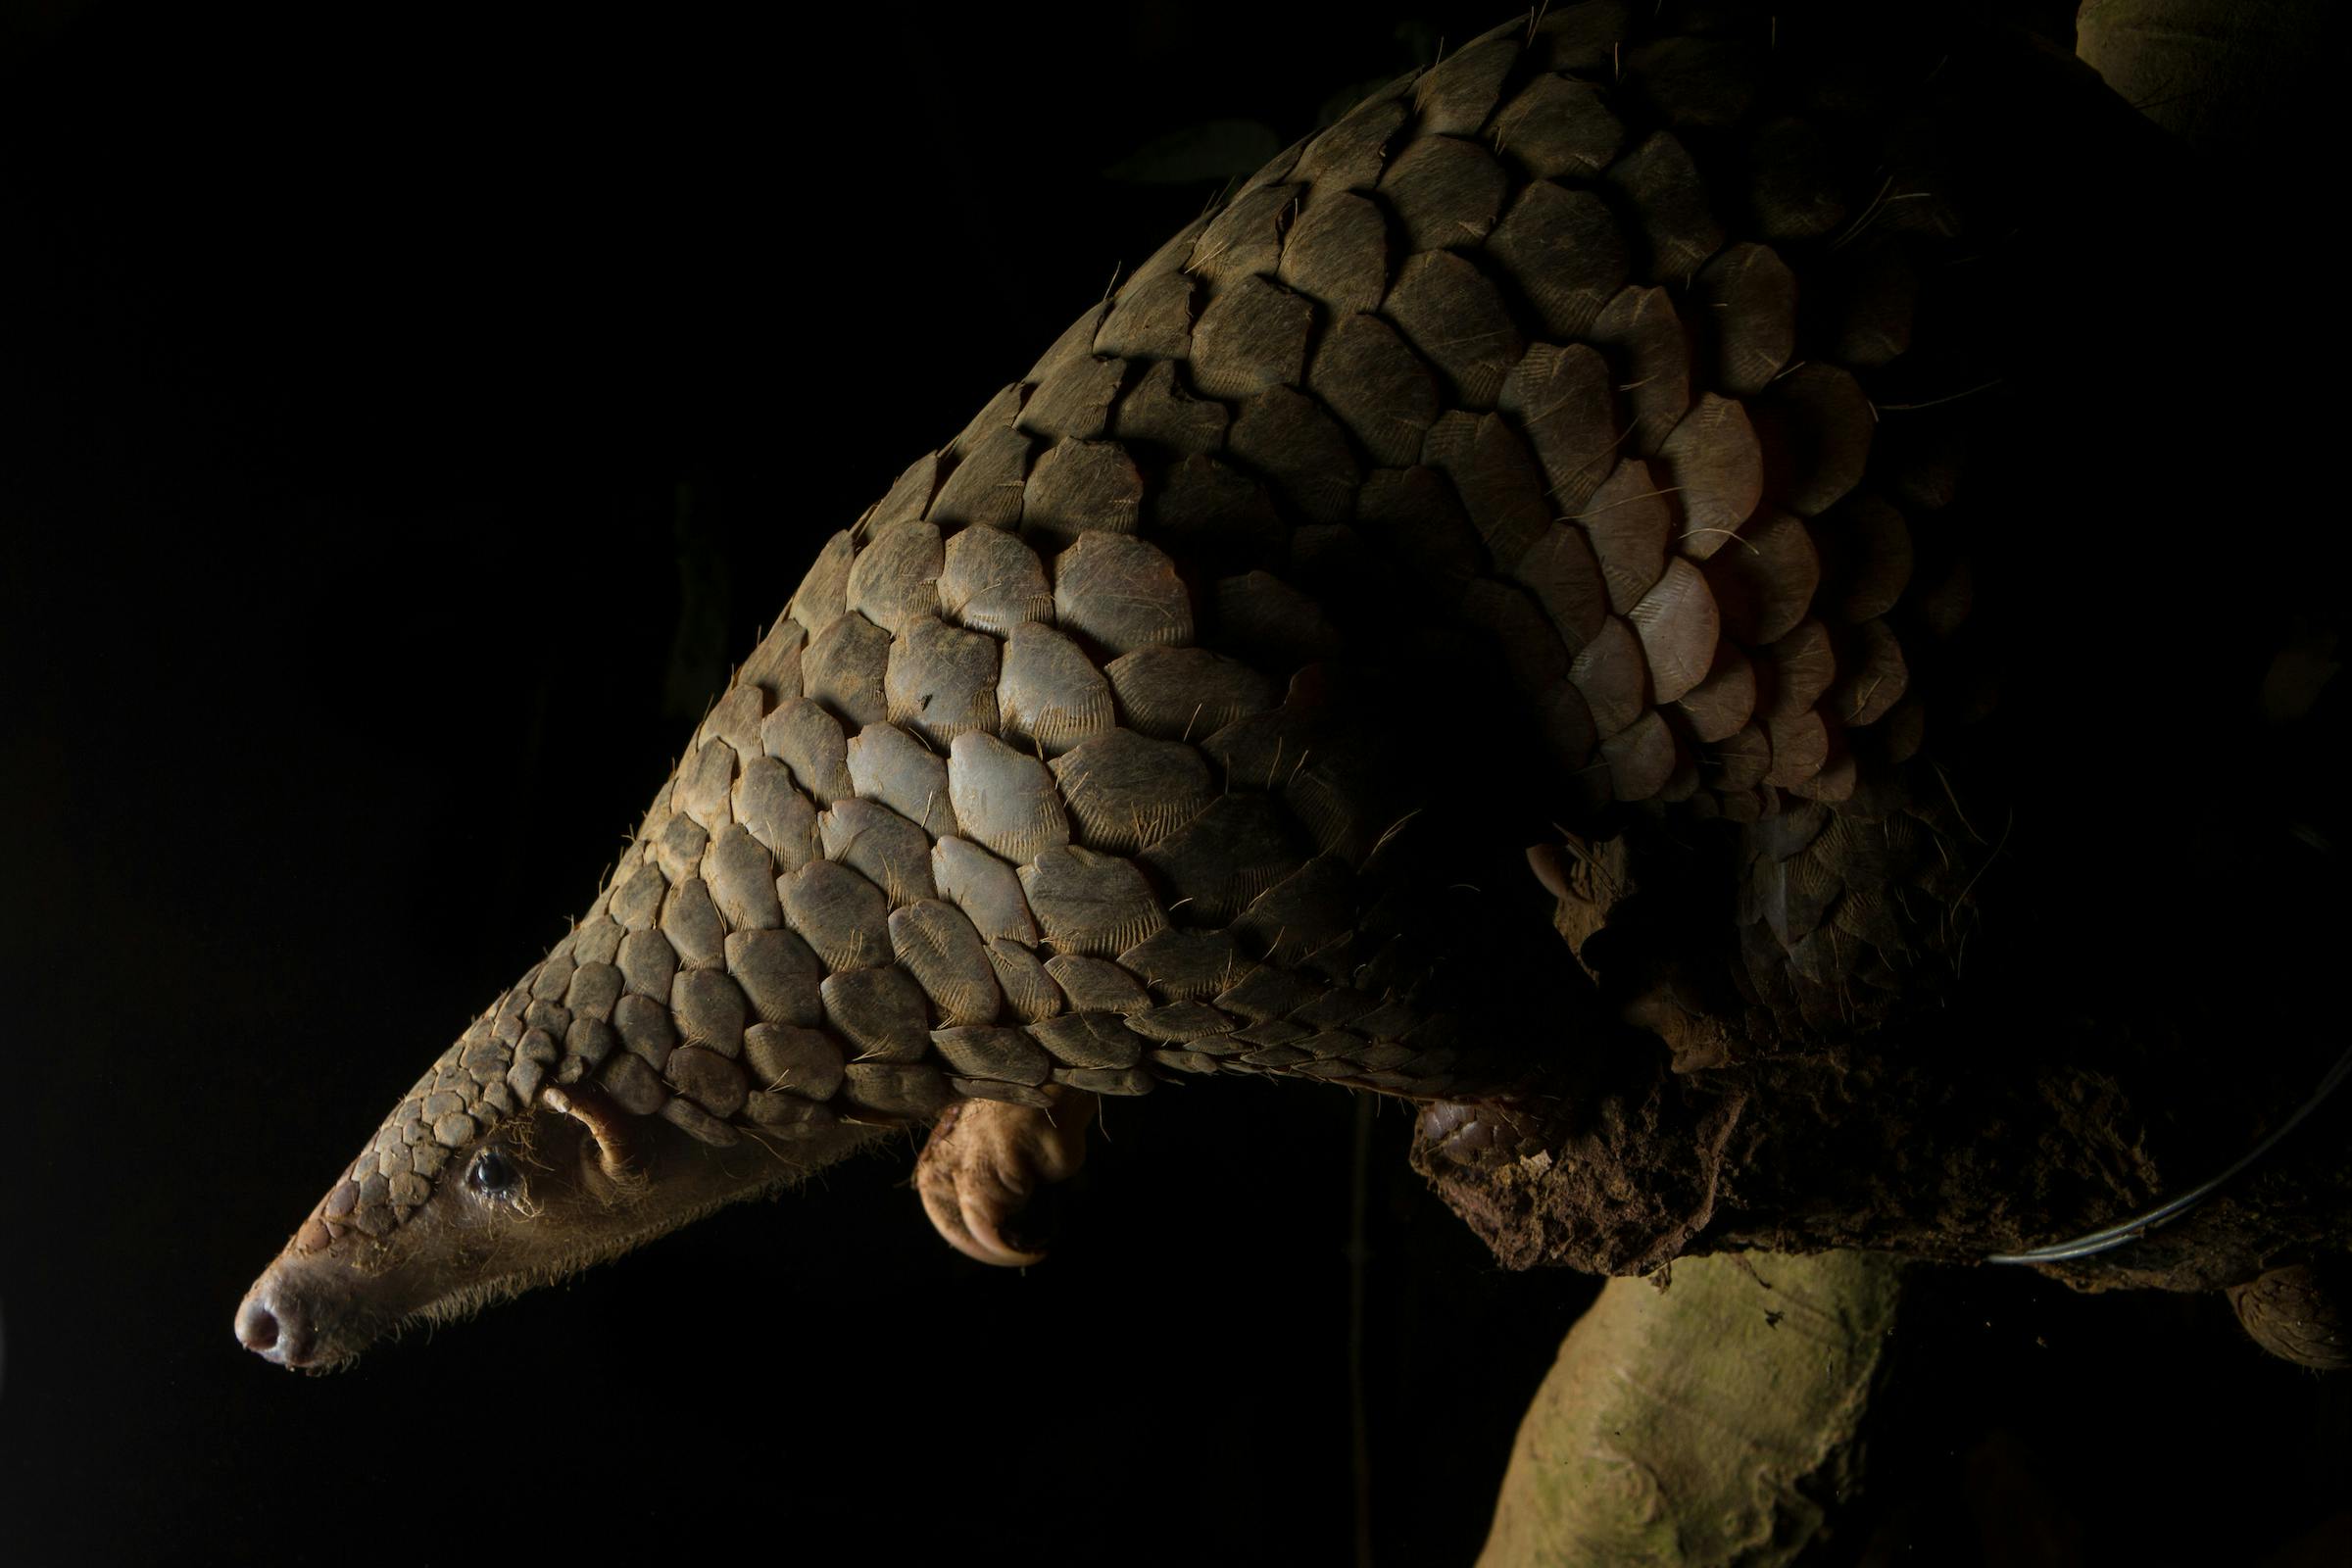 So, are Pangolins a Reptile or a Type of Armadillo?